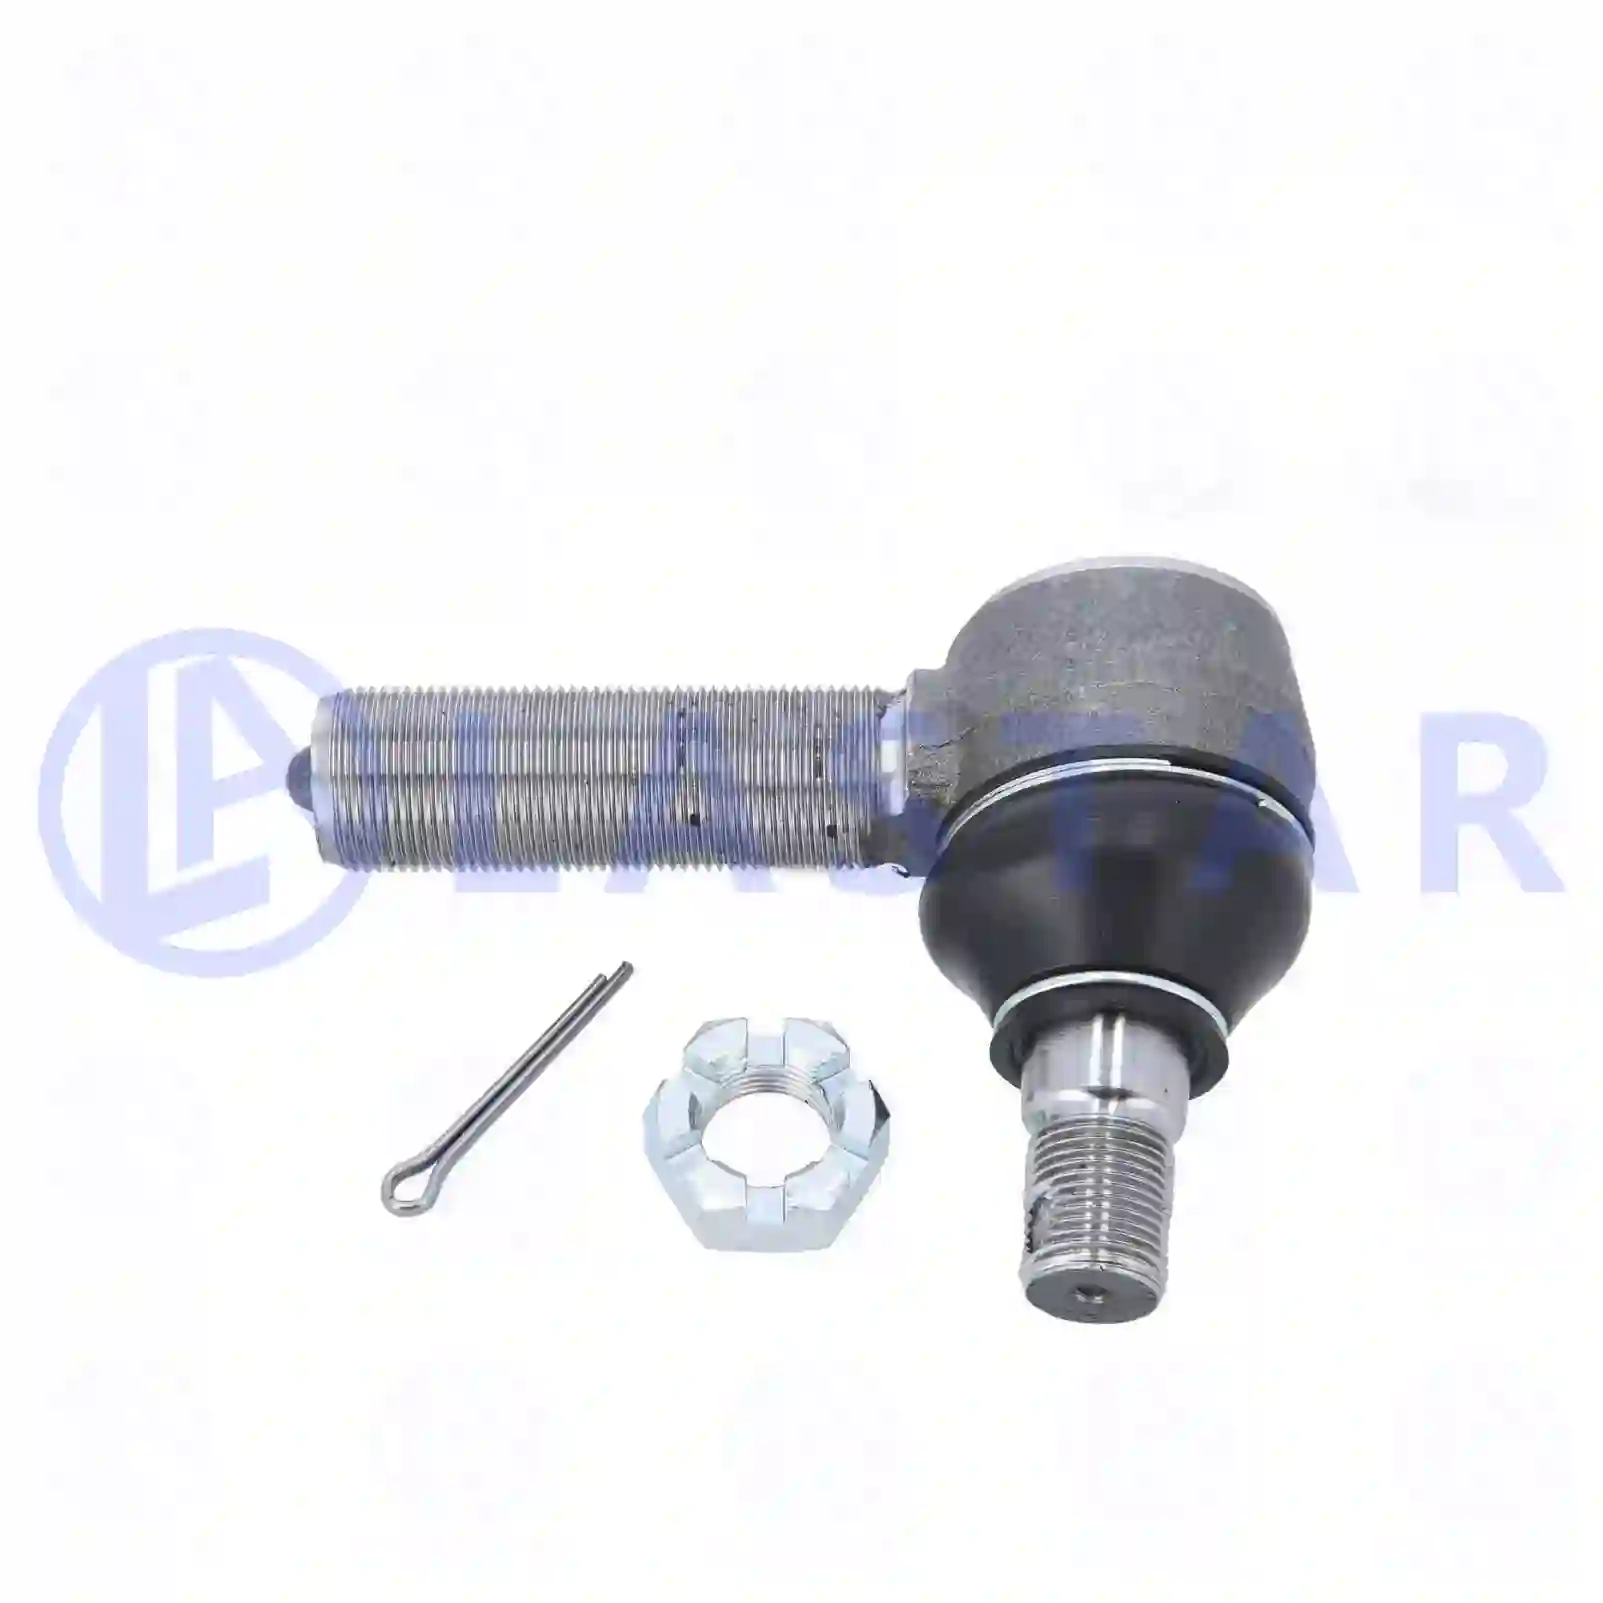 Ball joint, right hand thread, 77704974, 3221931R91, 02311220, 08558527, 42487165, 8558527, AL38645, 0003301235, 0003307535, 0003309735, 0003309935, 0003383429, 0003383529, 0023301335, 6313300535, X5424102, 120324001, 1696919, 85125134, ZG40370-0008 ||  77704974 Lastar Spare Part | Truck Spare Parts, Auotomotive Spare Parts Ball joint, right hand thread, 77704974, 3221931R91, 02311220, 08558527, 42487165, 8558527, AL38645, 0003301235, 0003307535, 0003309735, 0003309935, 0003383429, 0003383529, 0023301335, 6313300535, X5424102, 120324001, 1696919, 85125134, ZG40370-0008 ||  77704974 Lastar Spare Part | Truck Spare Parts, Auotomotive Spare Parts